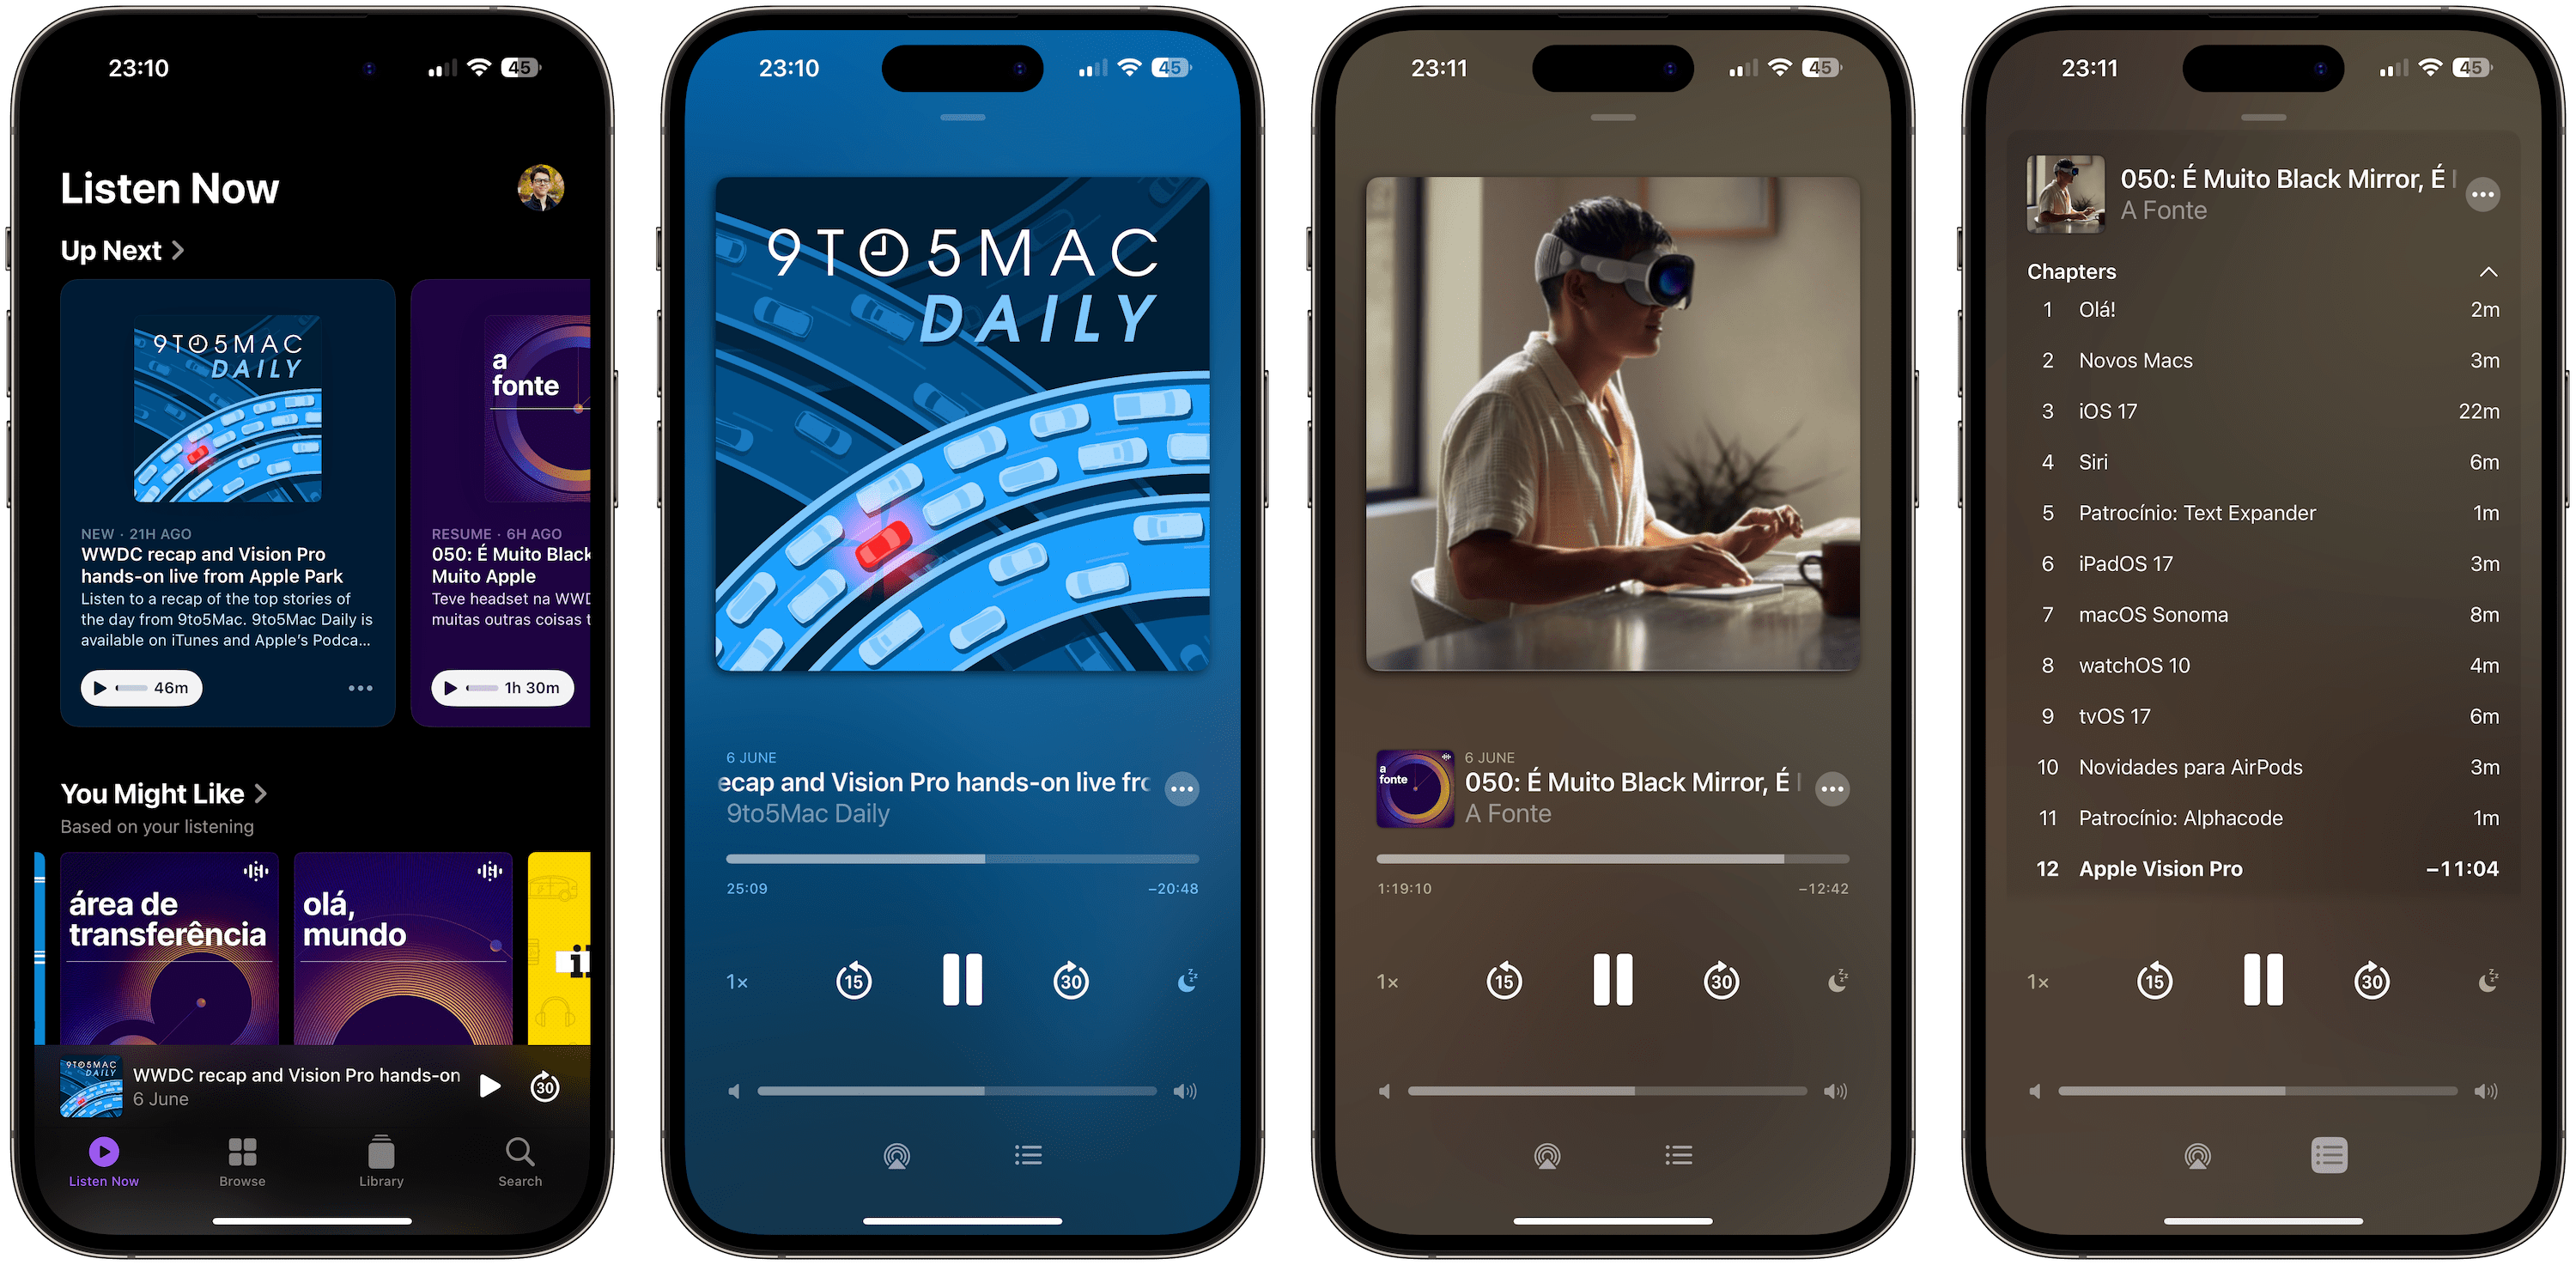 Apple Podcasts has a slightly refreshed interface in iOS 17